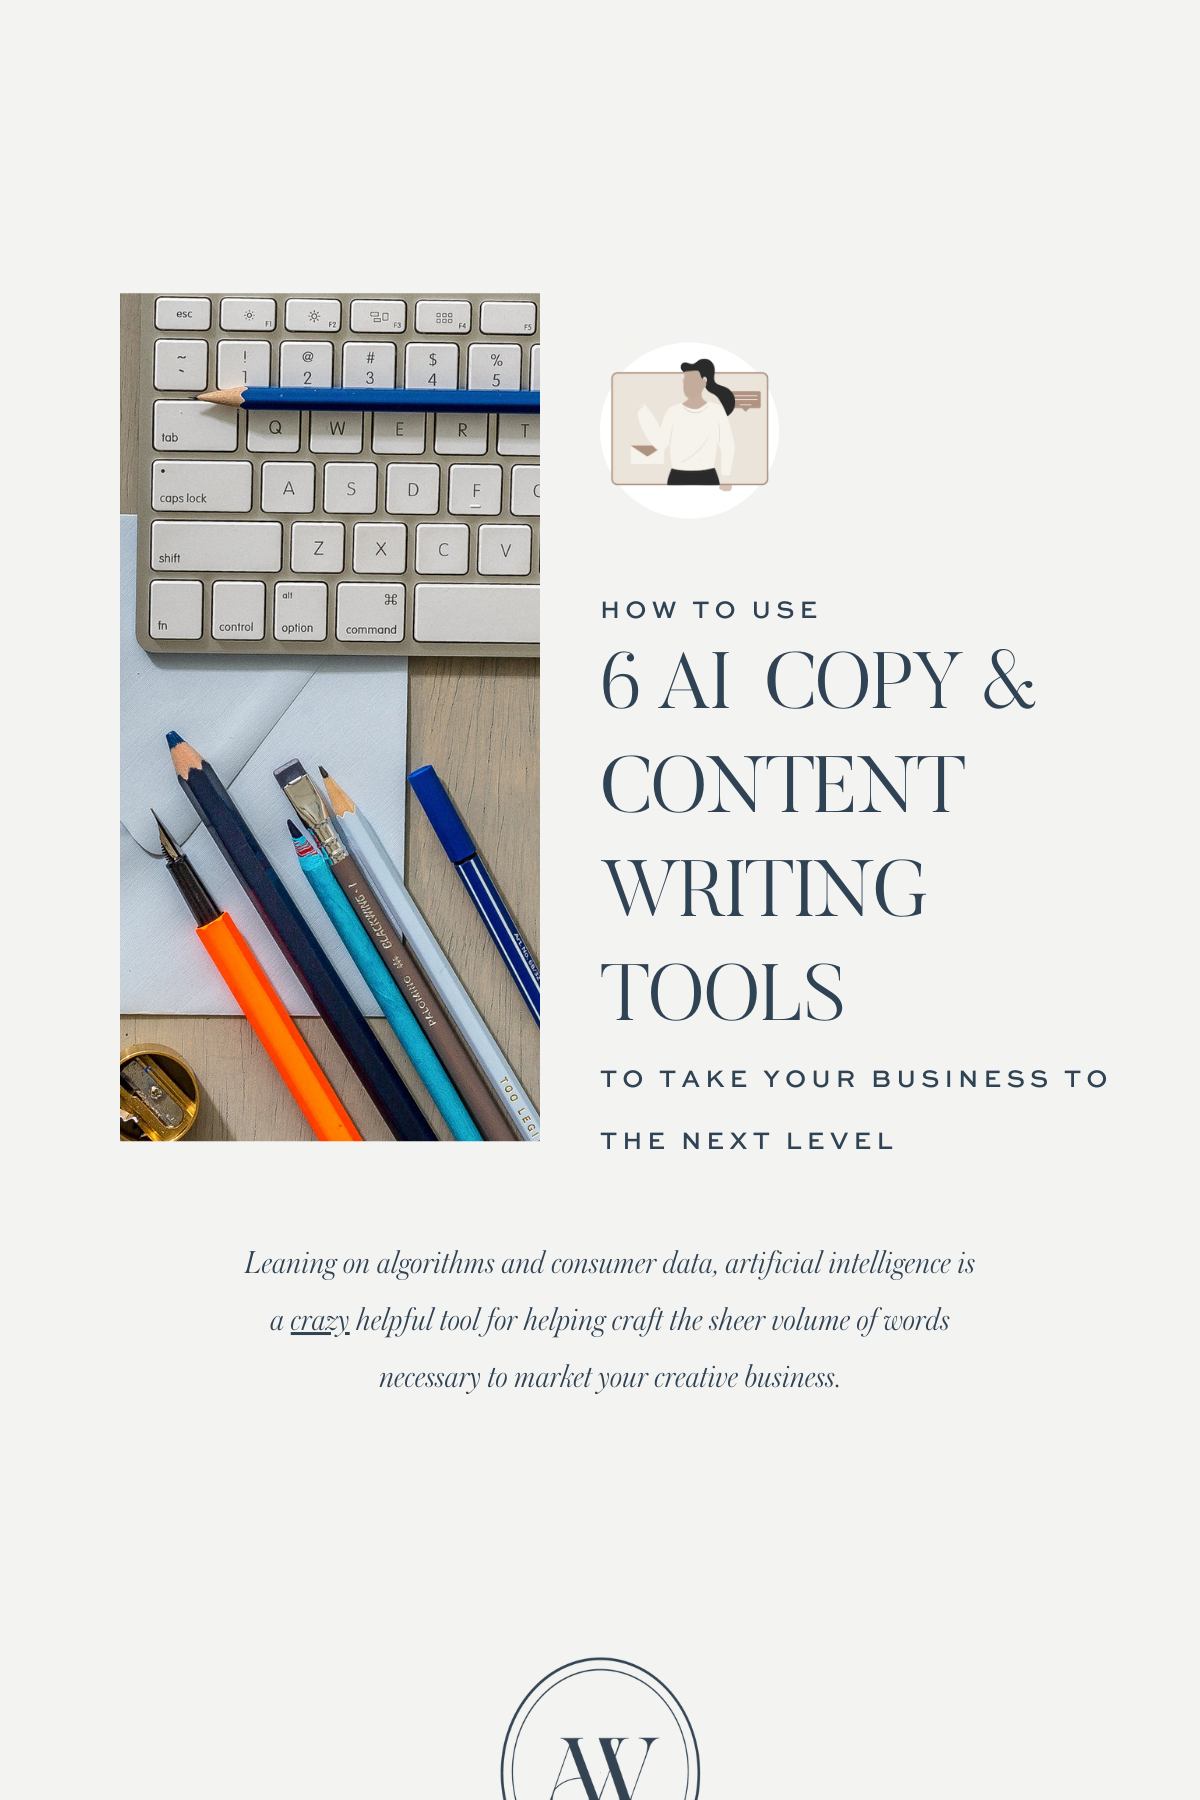 How to Use AI Copywriting Tools for content writing